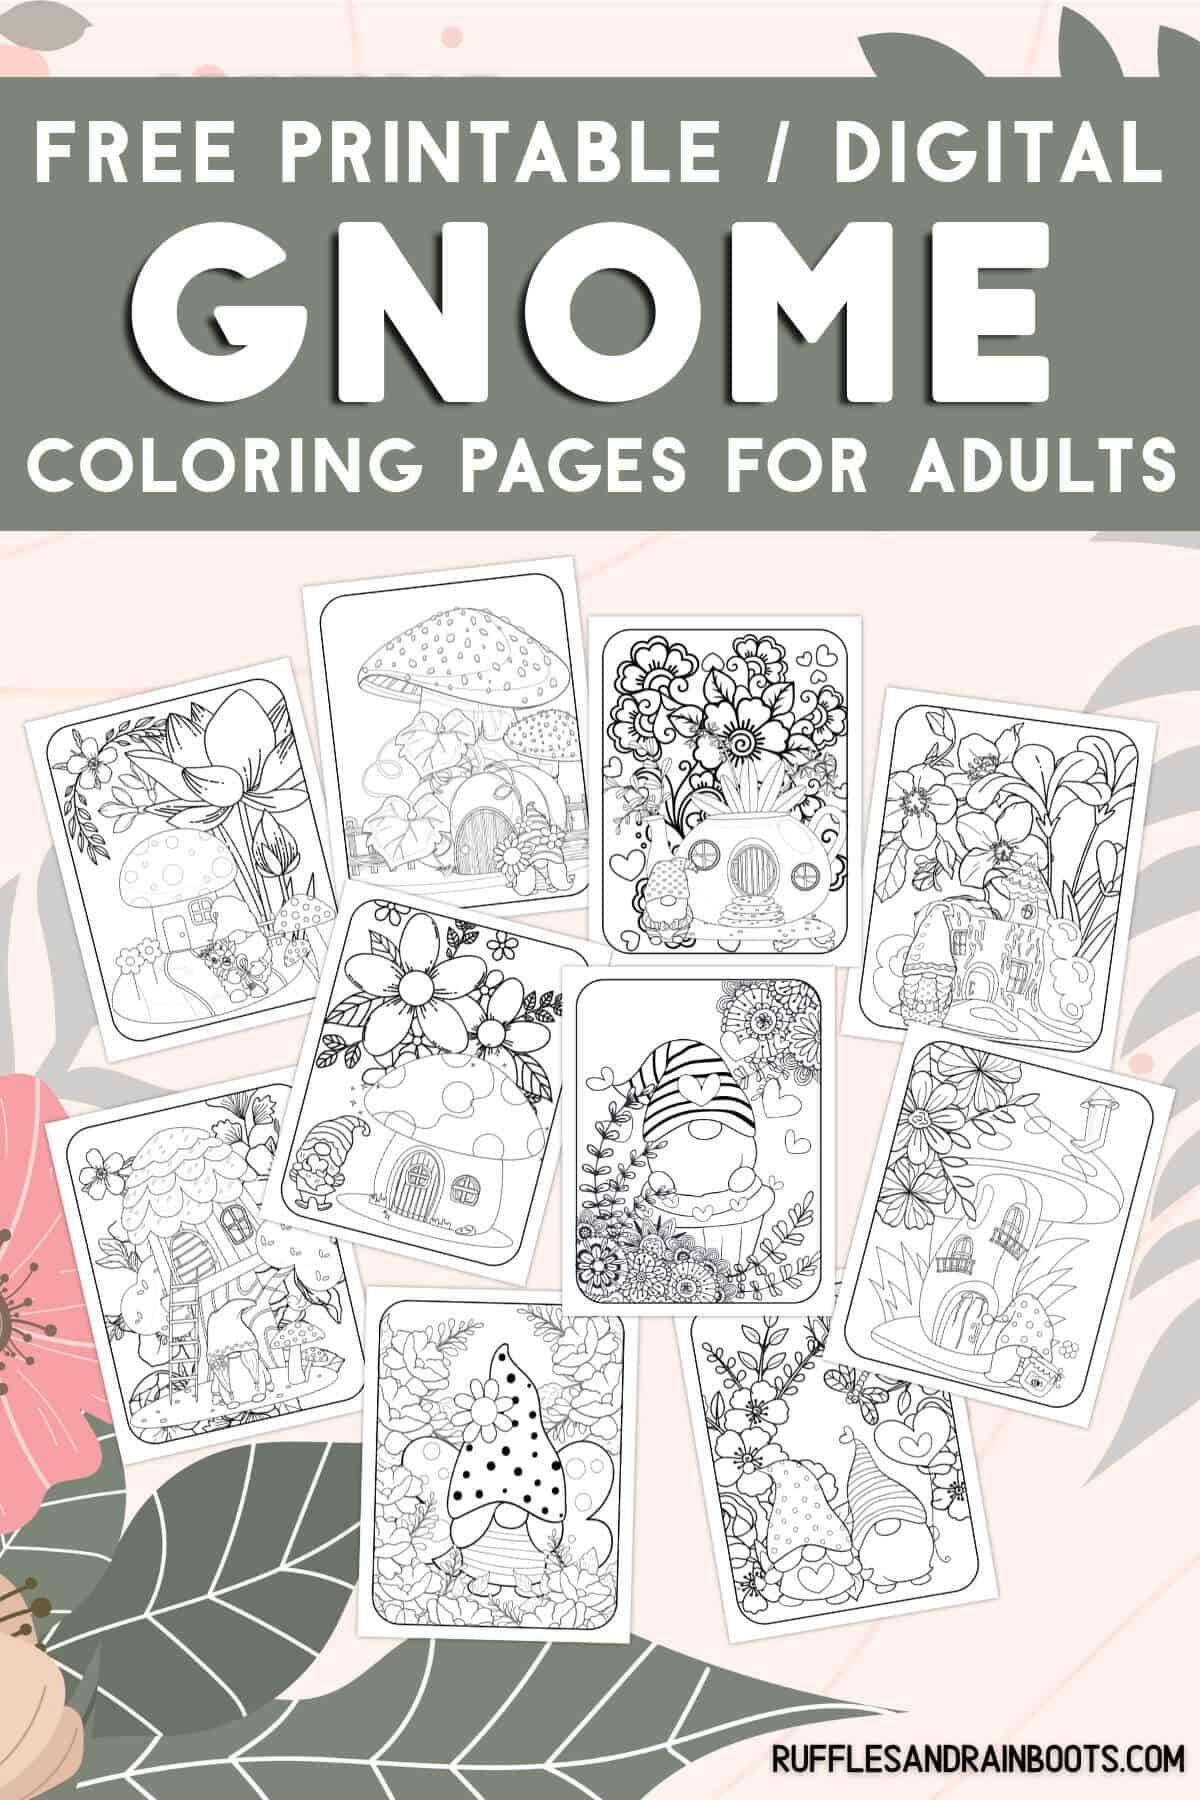 Vertical image of 10 gnome images with intricate designs on pastel boho background with text which reads free printable digital gnome coloring pages for adults.